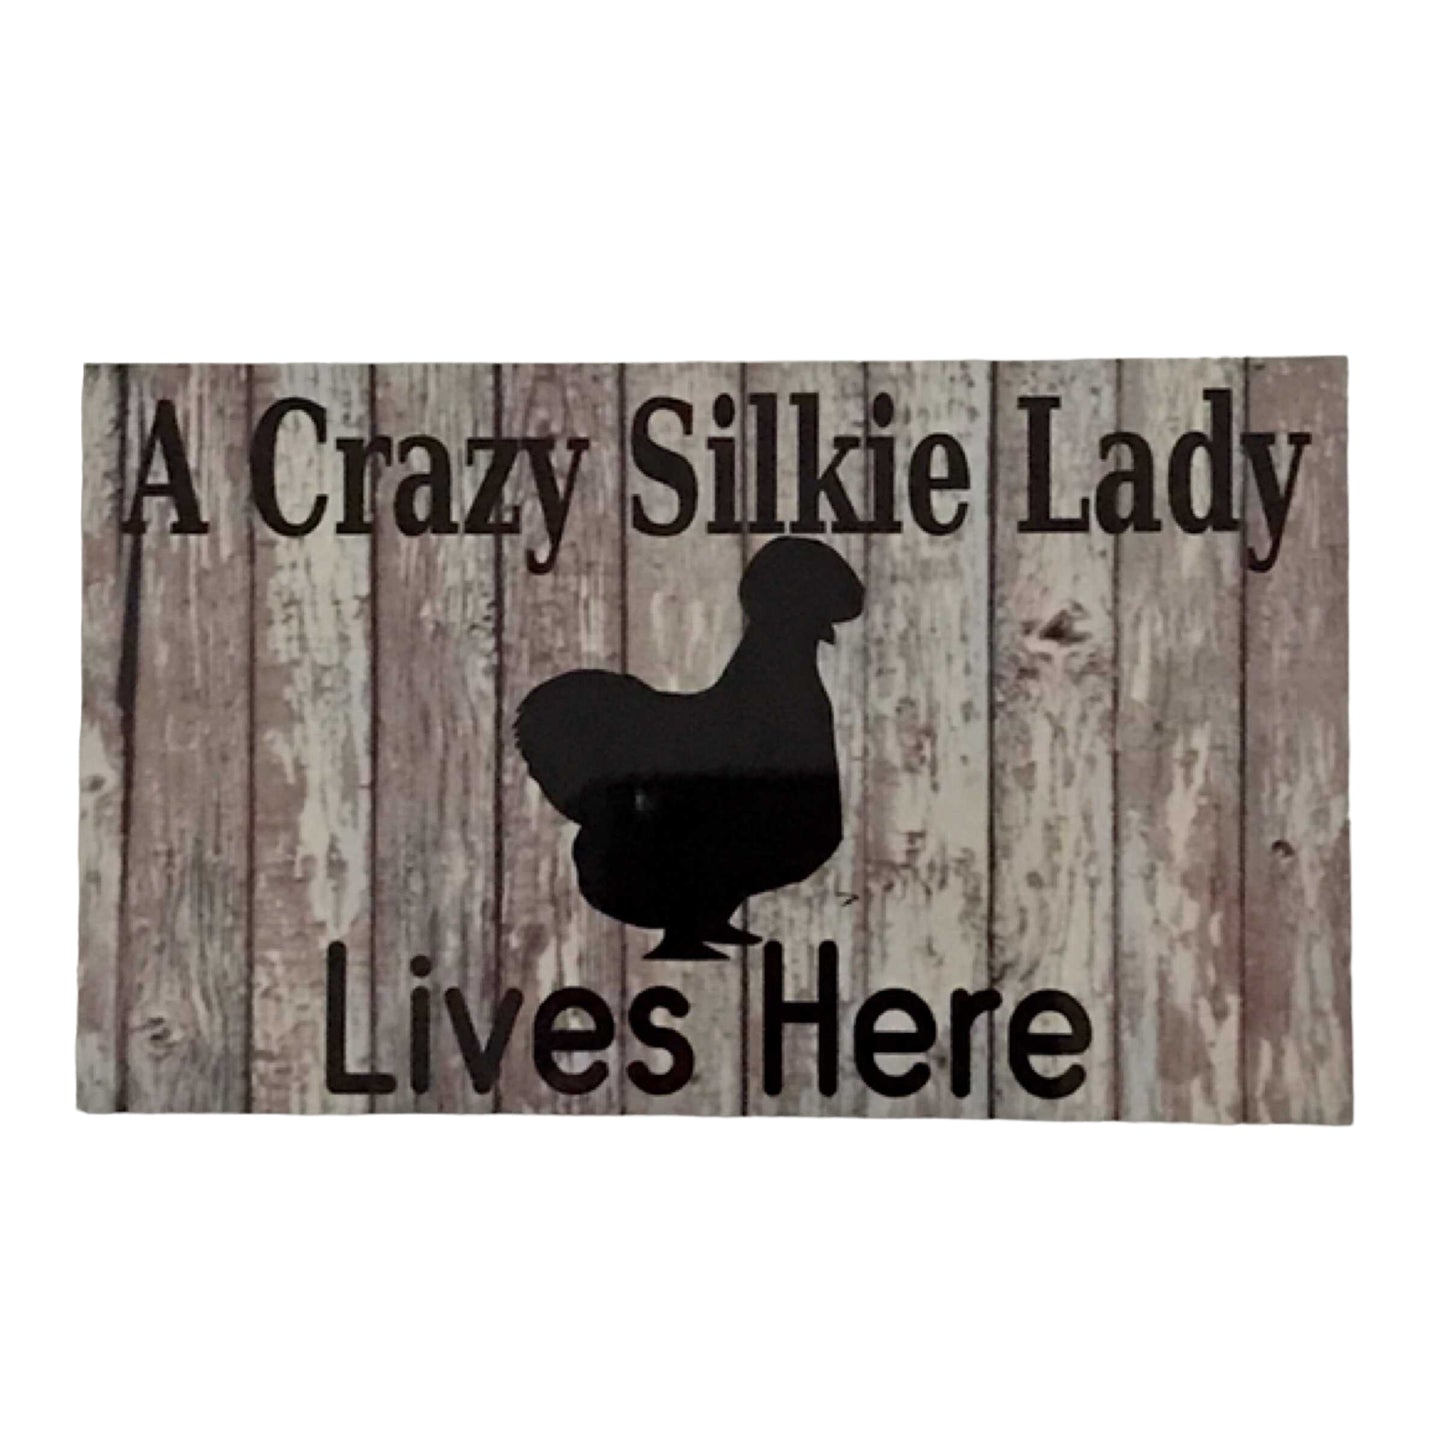 Crazy Chicken Silkie Lady Lives Here Sign